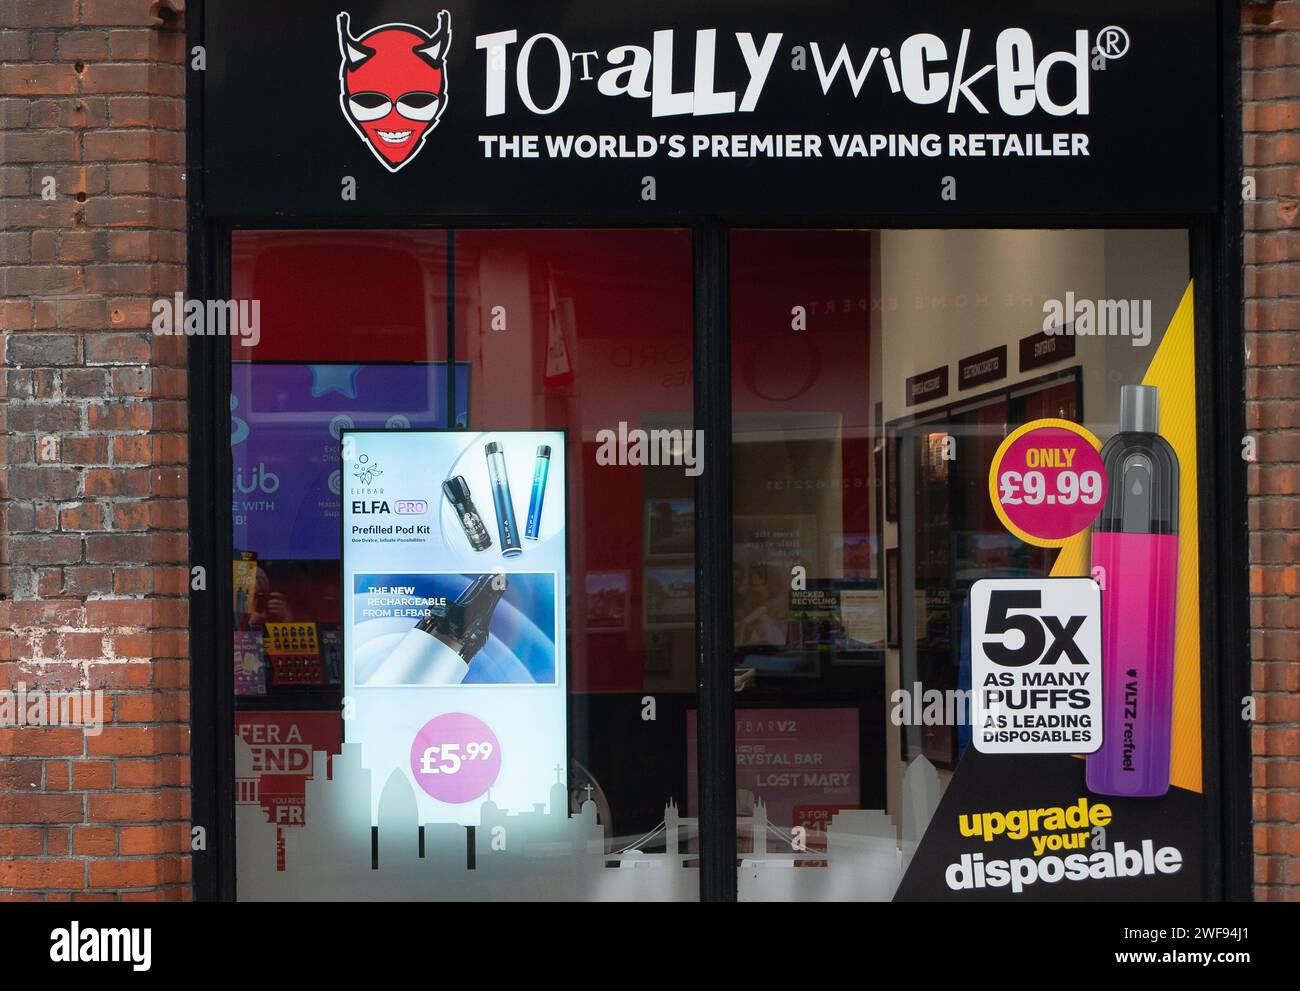 Maidenhead, UK. 29th January, 2024. A Totally Wicked vaping shop in Maidenhead, Berkshire. The Government has announced that disposable vapes are set to be banned across the UK as part of plans to tackle the rising number of young people taking up vaping. It is already illegal to sell any vape to anyone under 18, but disposable vapes that are often sold in smaller, more colourful packaging than refillable ones are a 'key driver behind the alarming rise in youth vaping', according to the Government. Discarded disposable vapes are also being littered across towns and the countryside. Credit: Mau Stock Photo